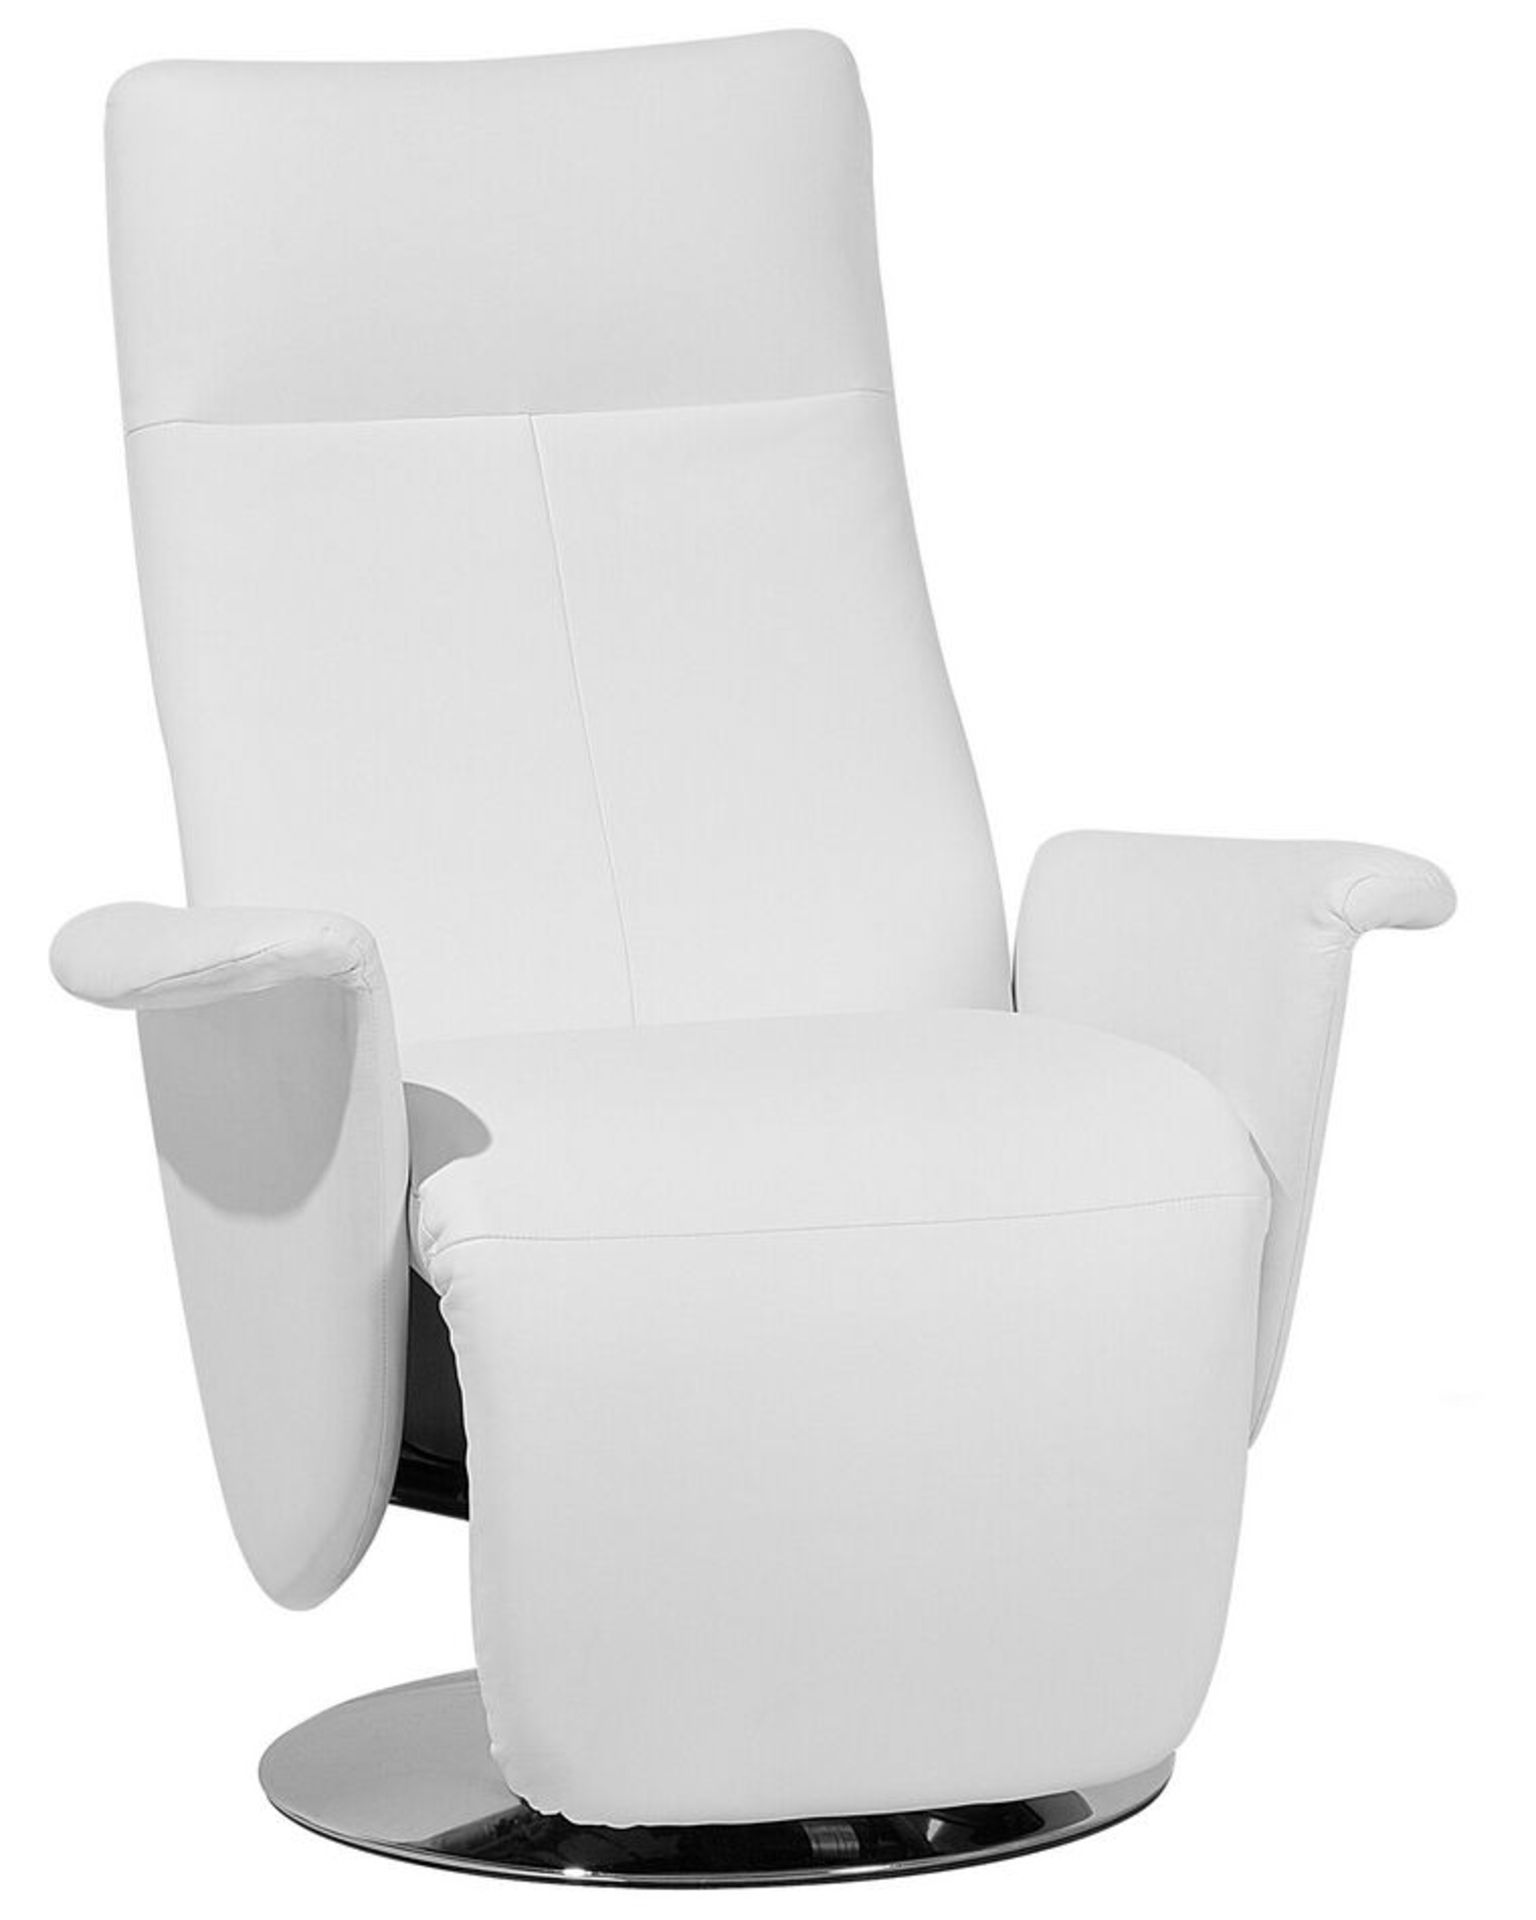 Prime Faux Leather Recliner Chair White . - R14. RRP £489.99. This elegant reclining chair is a